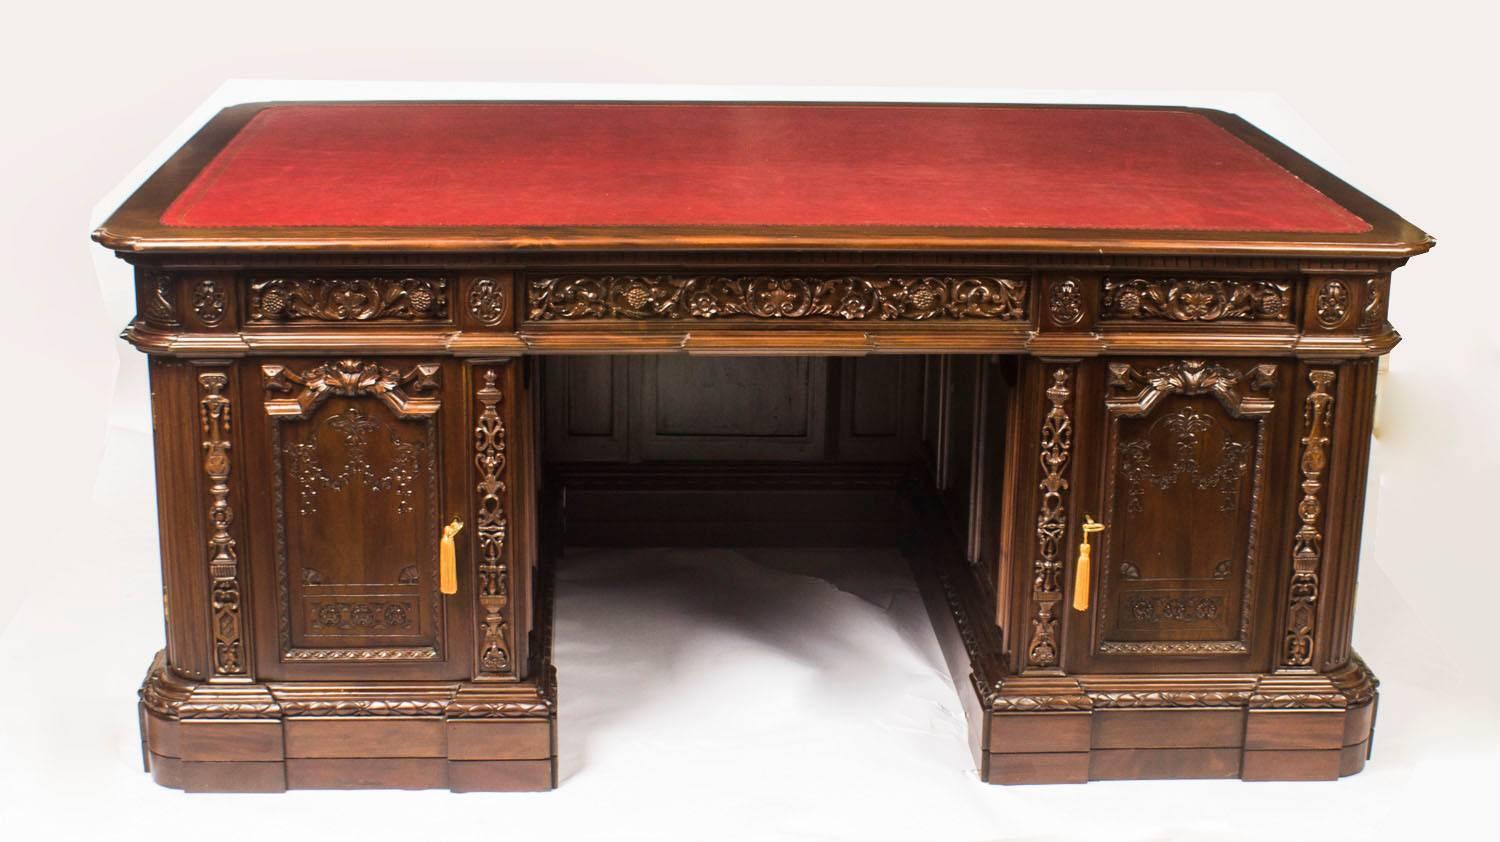 This is a magnificent 20th century copy of the Resolute Partners desk given by Queen Victoria to President Rutherford B. Hayes in 1880 and used by US presidents ever since.

This desk has been beautifully made by master craftsmen and features